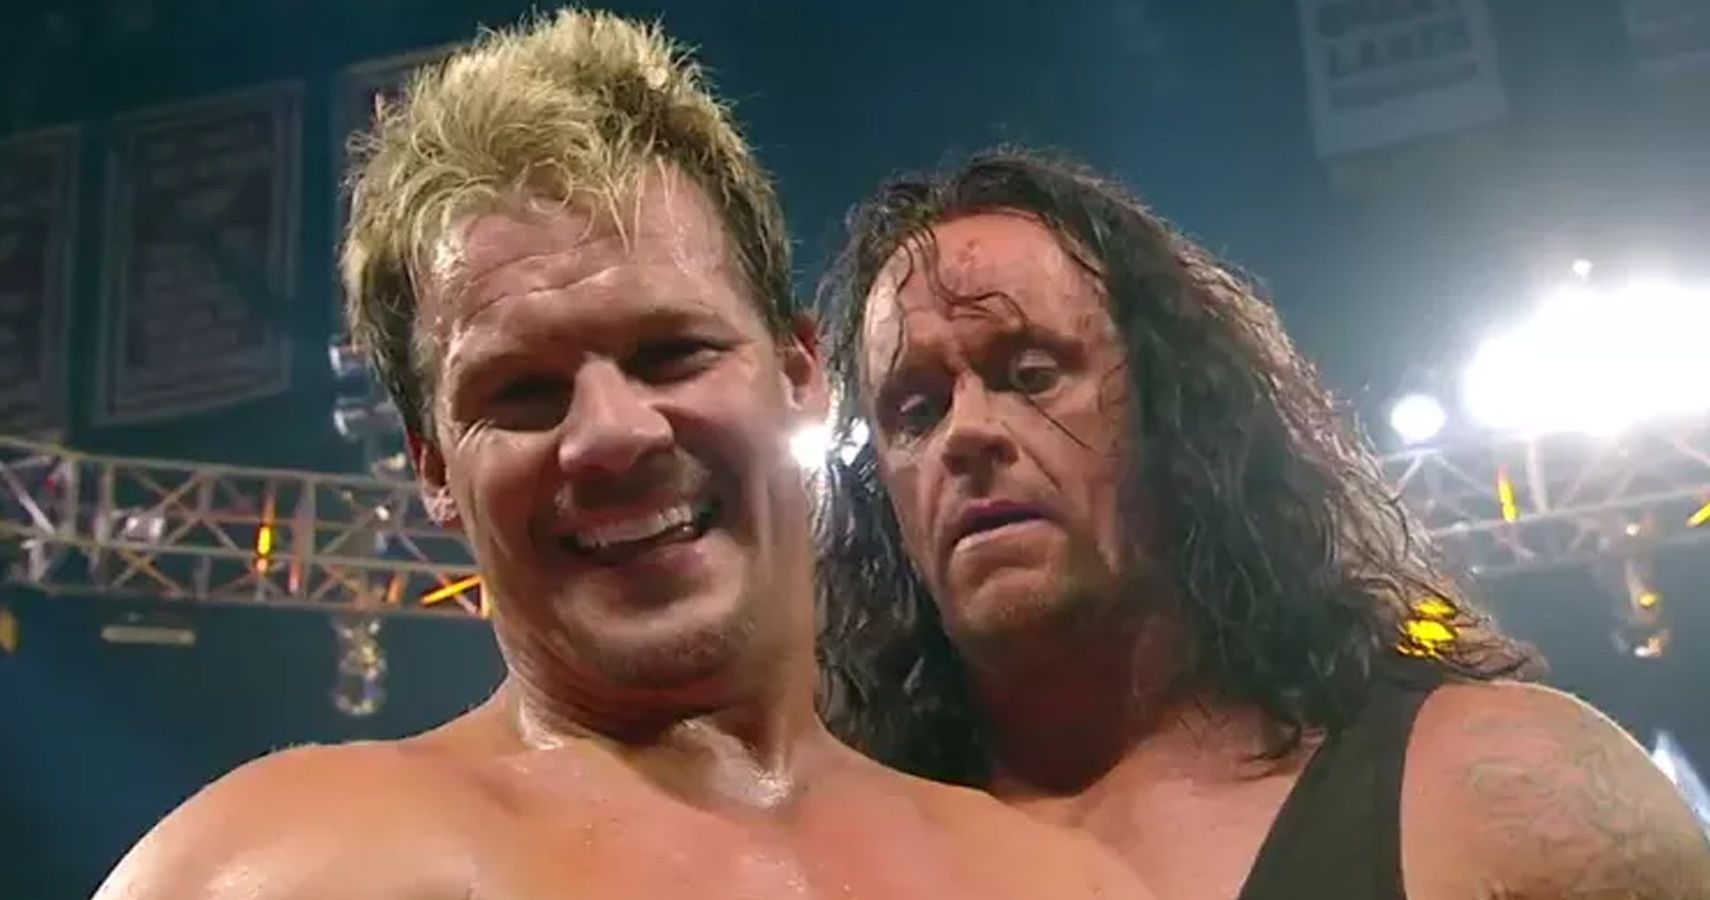 The Undertaker and Chris Jericho